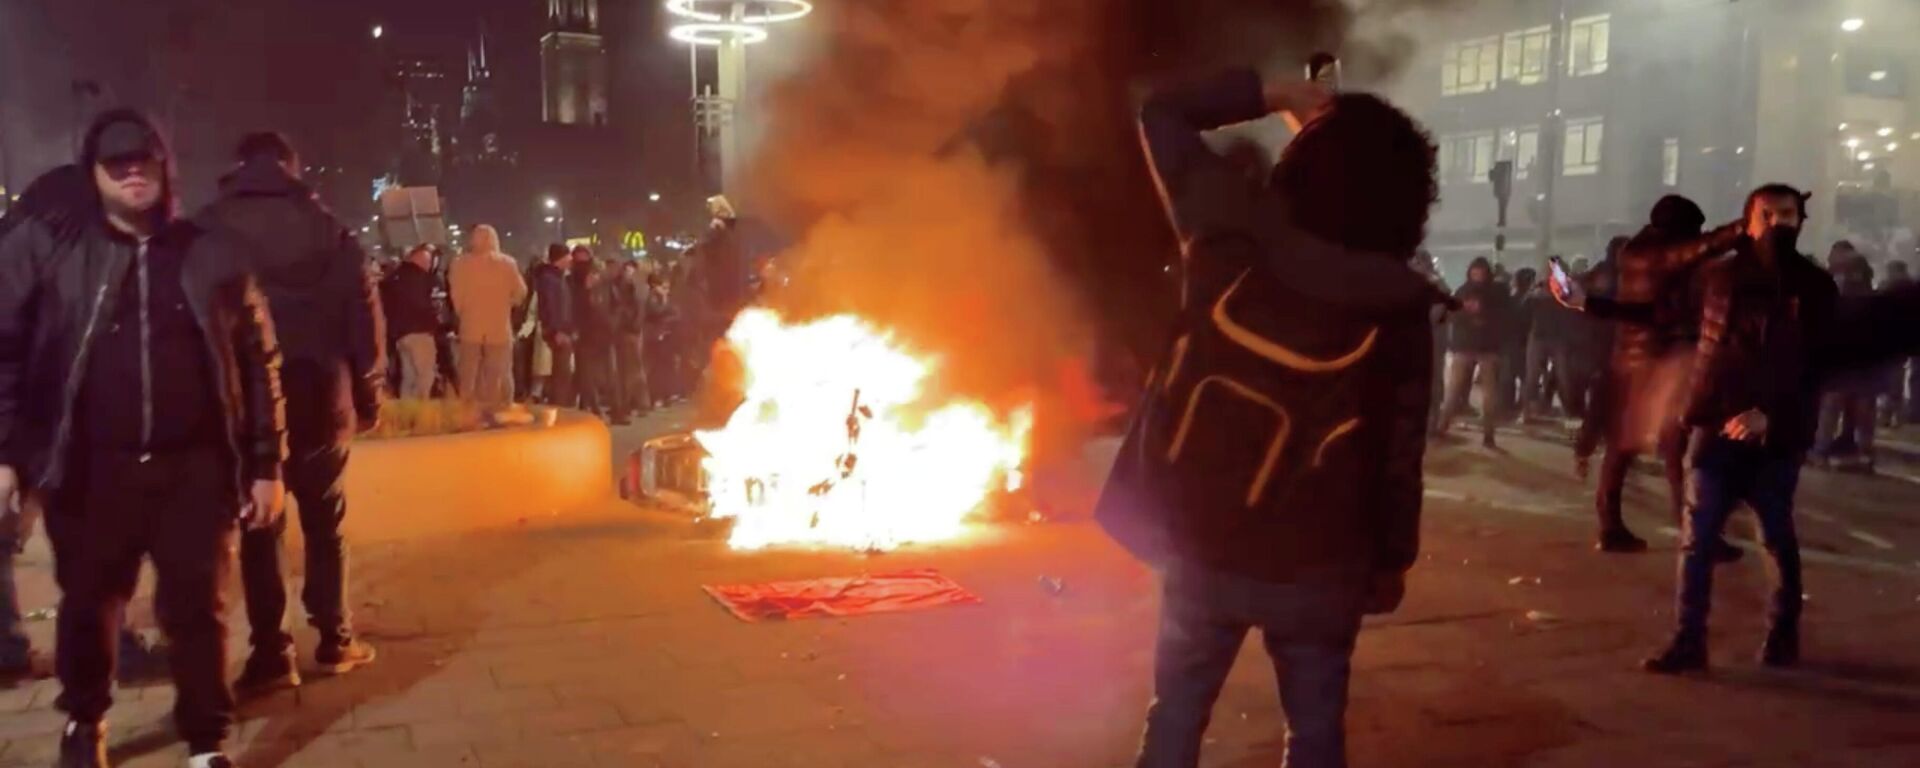 Protesters watch a motorcycle burning in Rotterdam, Netherlands November 20, 2021, in this screen grab obtained from a social media video. Video recorded November 20, 2021 - Sputnik International, 1920, 22.11.2021